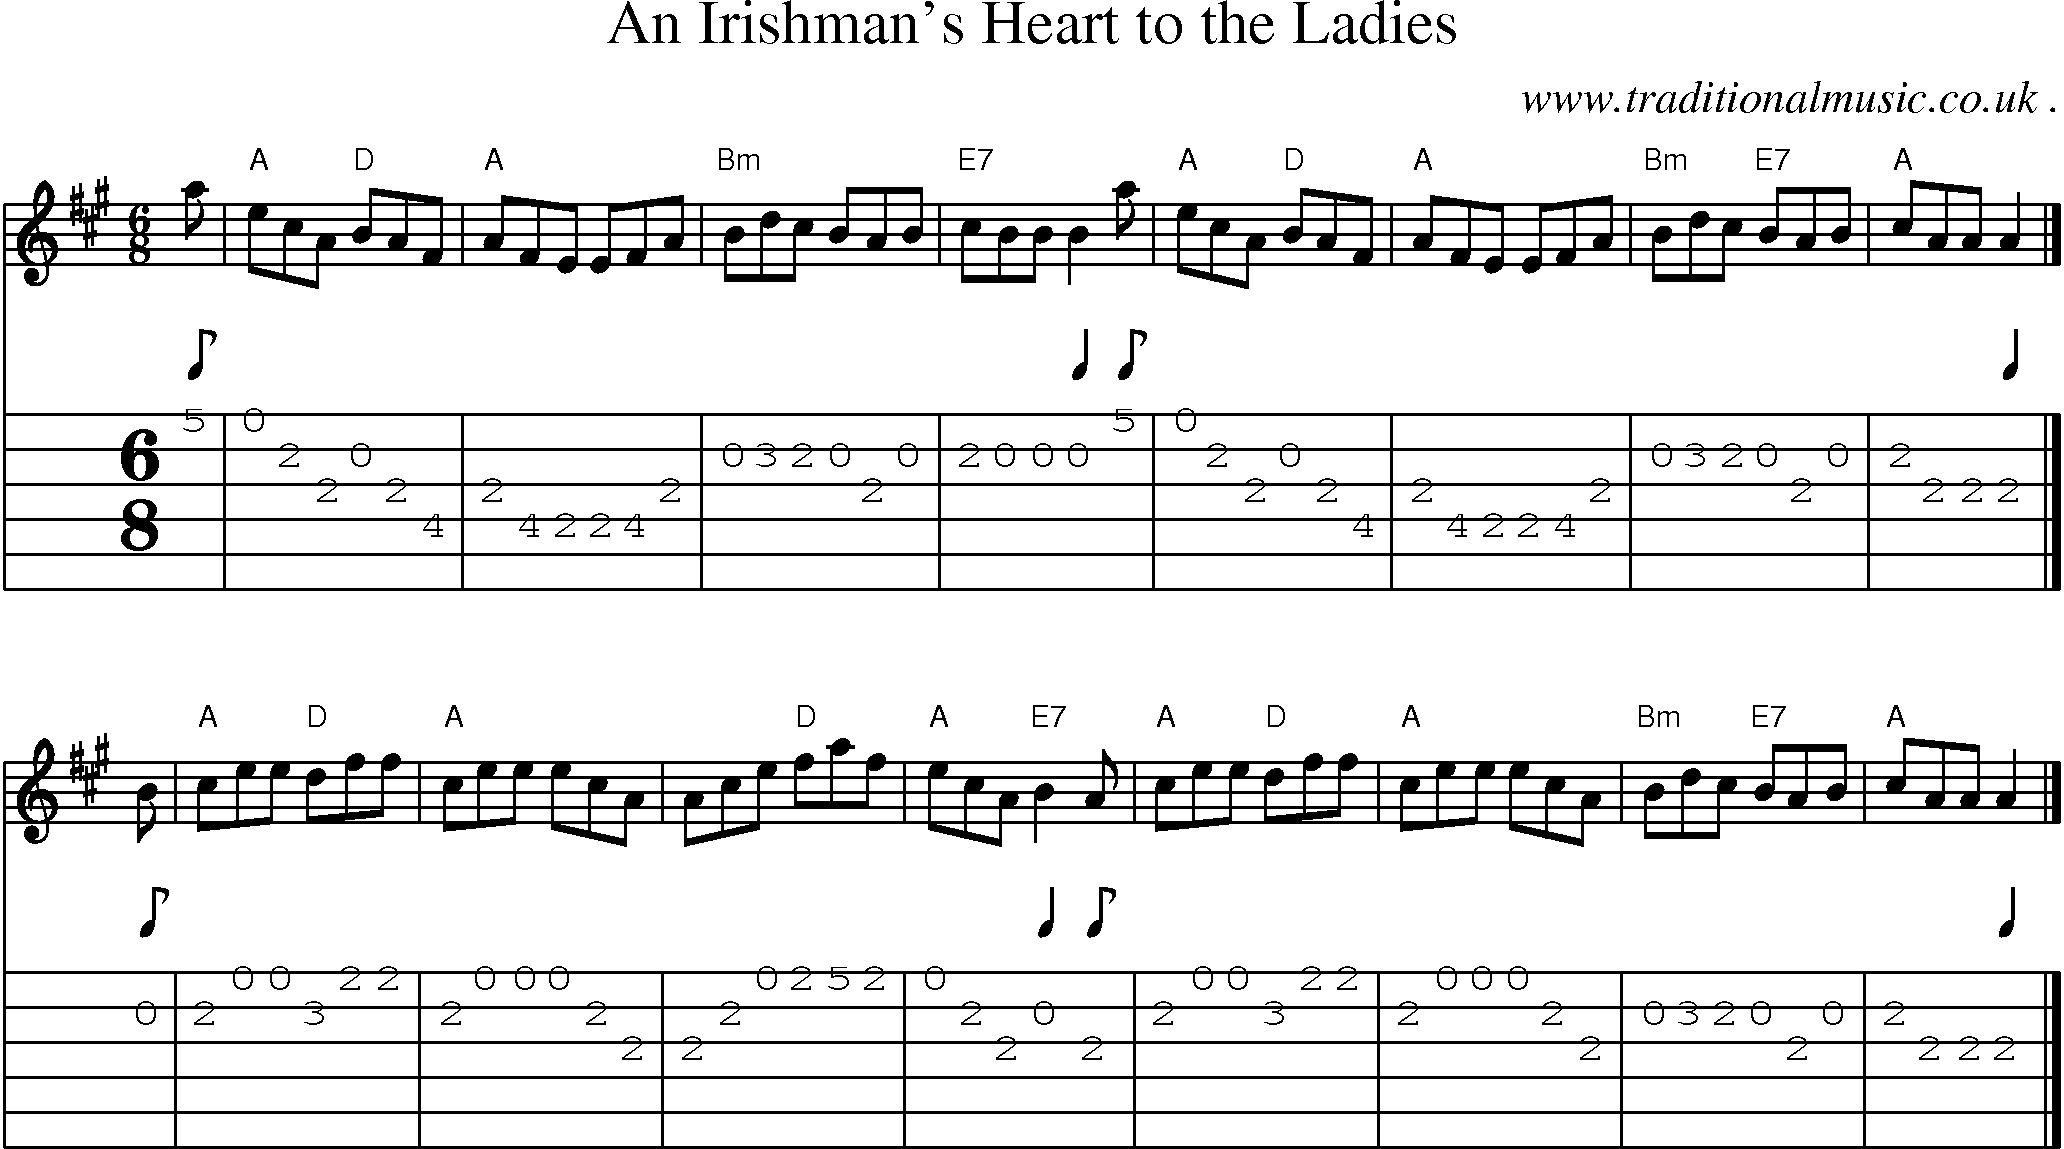 Sheet-music  score, Chords and Guitar Tabs for An Irishmans Heart To The Ladies